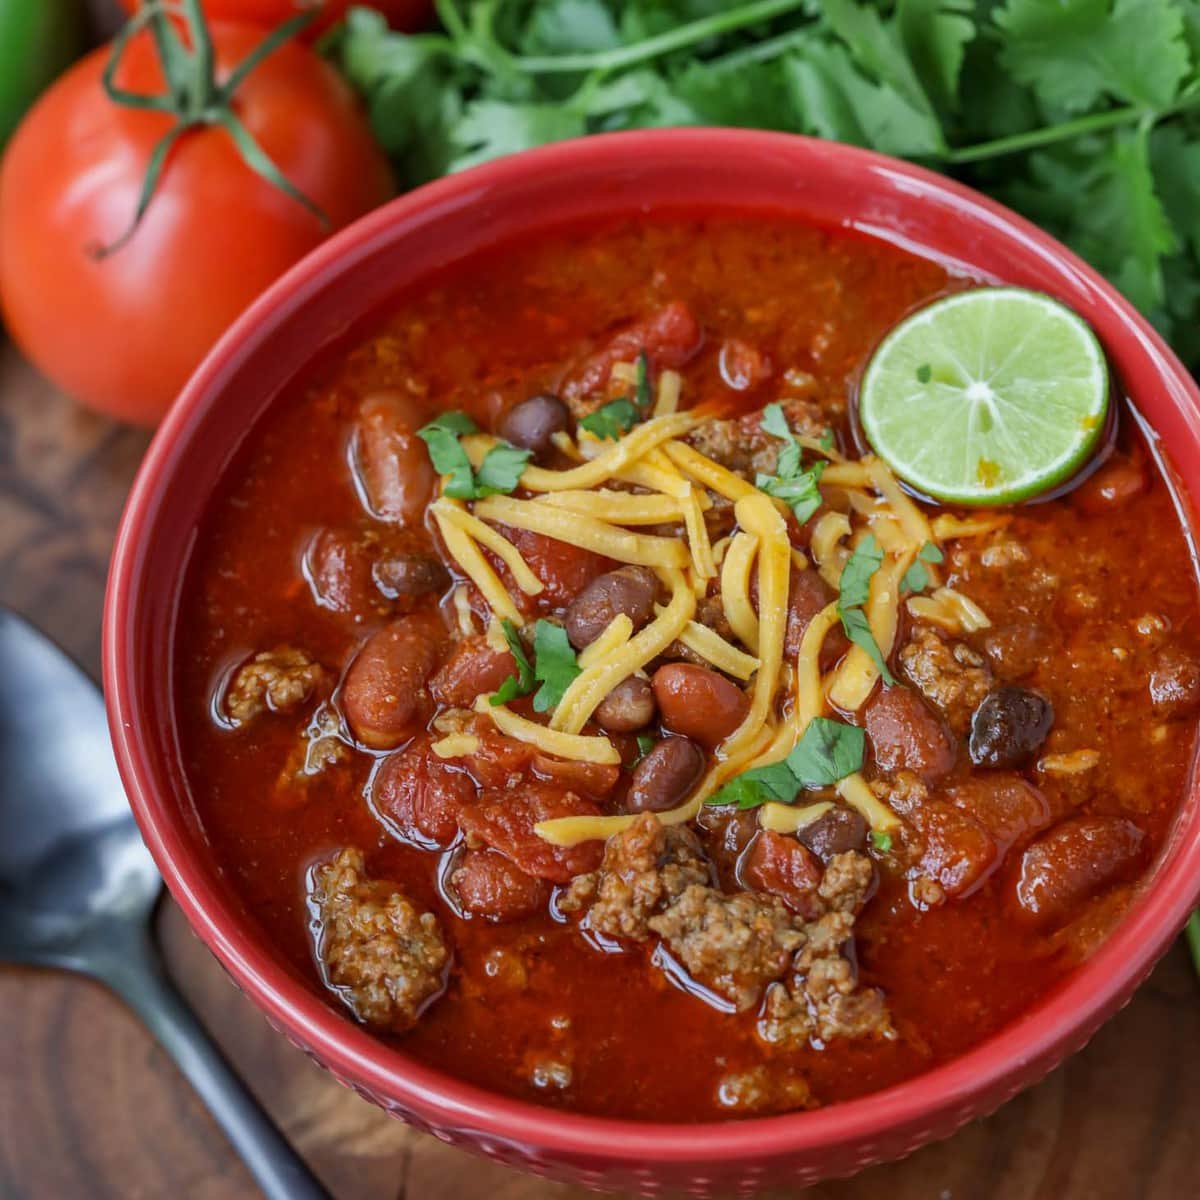 Halloween dinner ideas - a bowl of the best chili recipe garnished with lime and cheese.